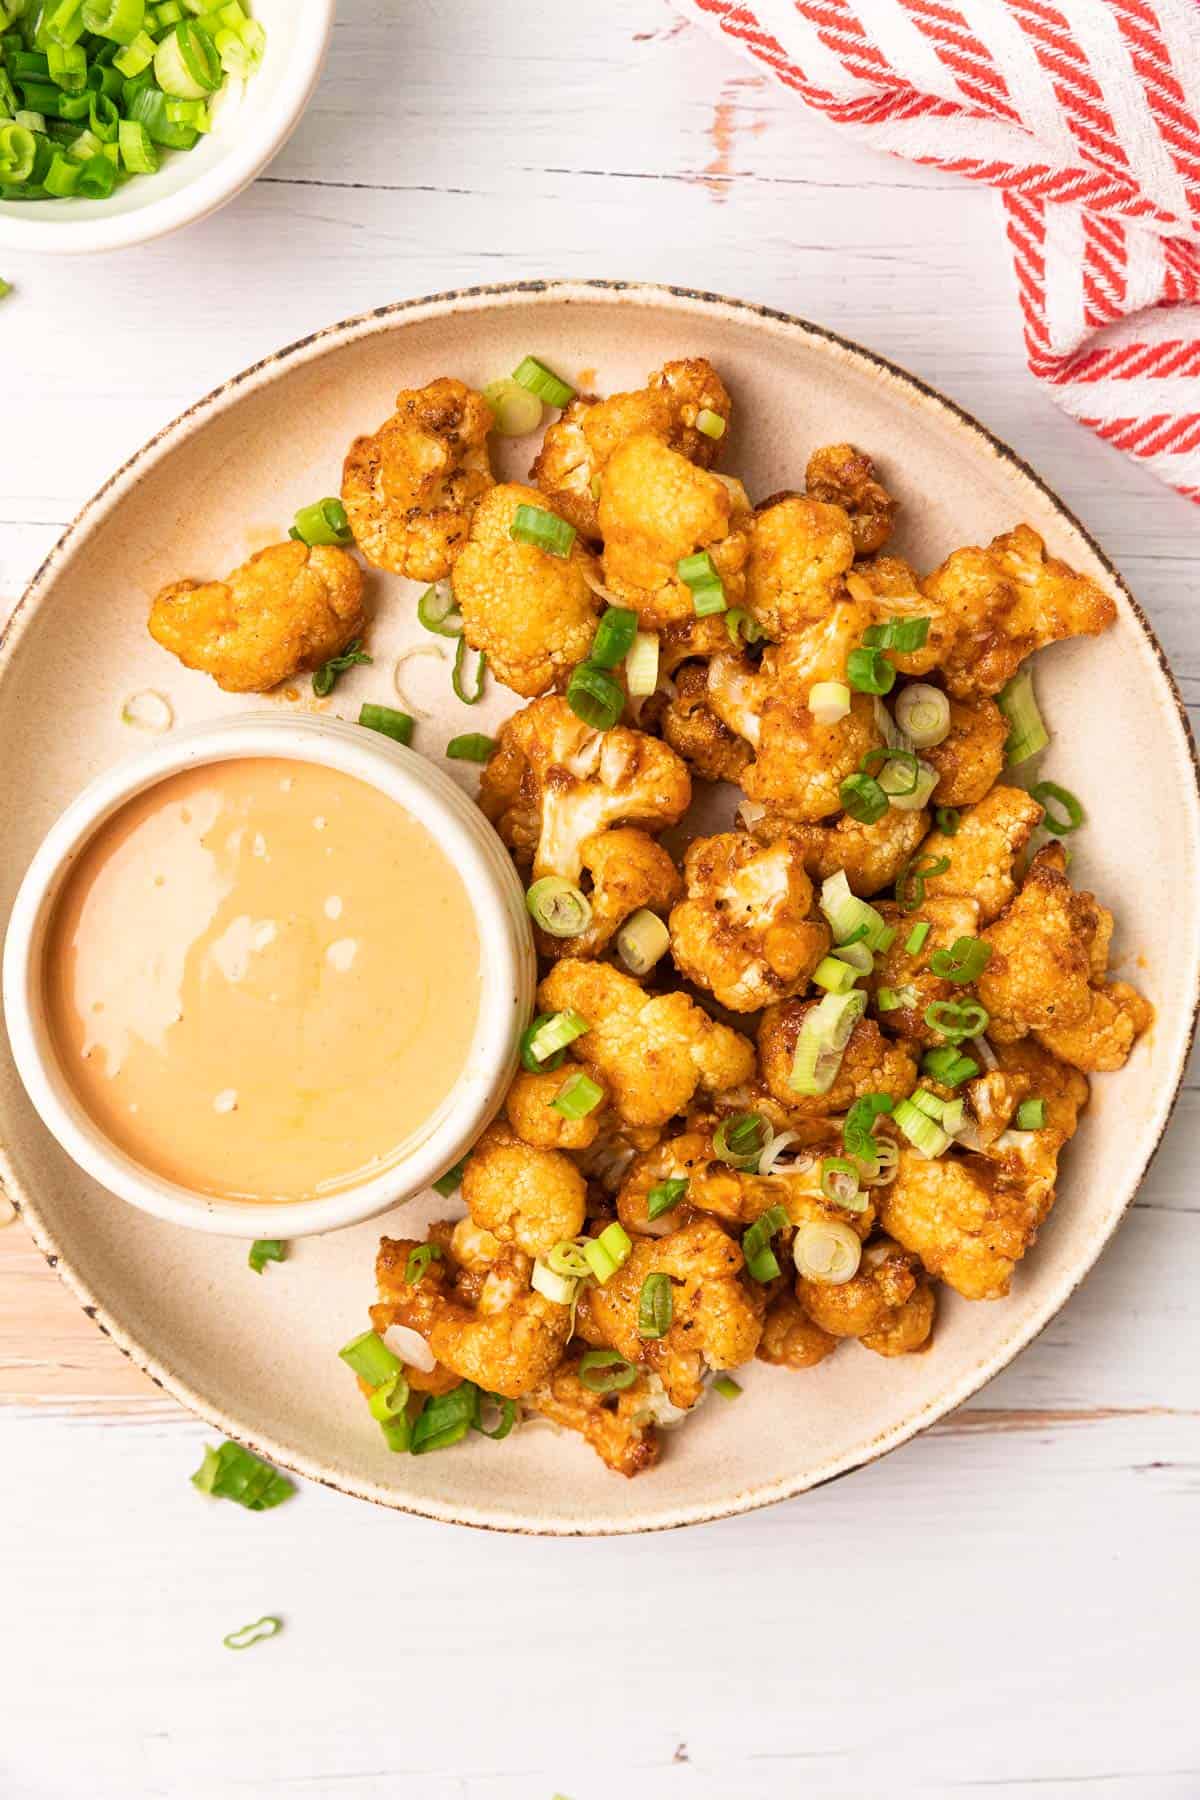 a plate of air fried cauliflower with a dipping sauce on the side